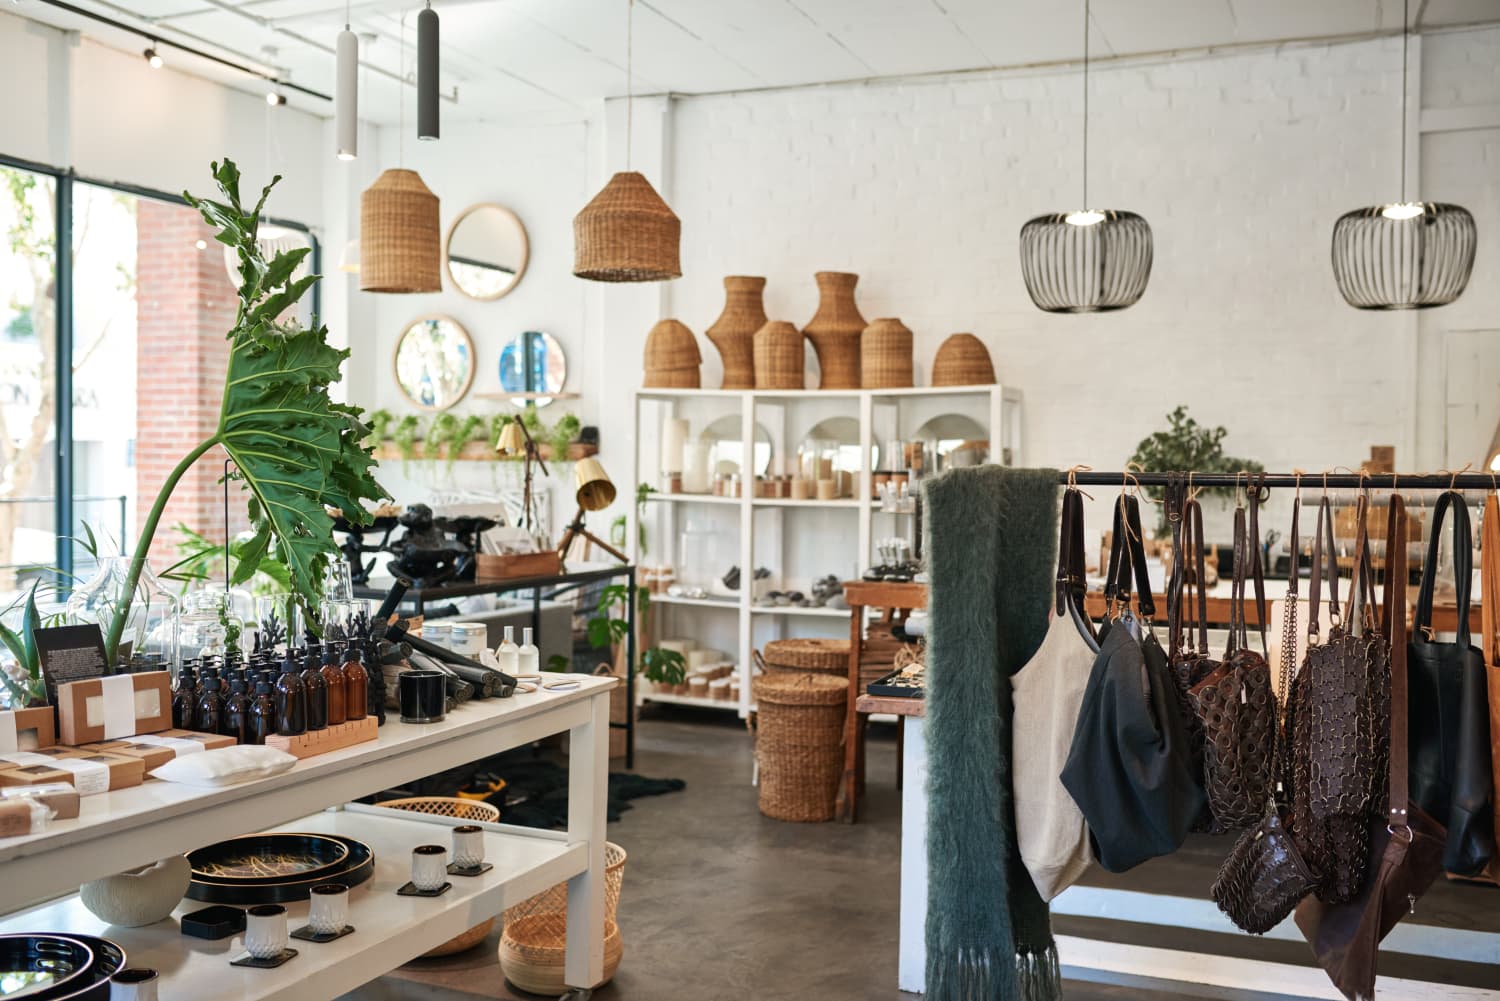 6 Home Decor Shops Around the World I’d Love to Visit